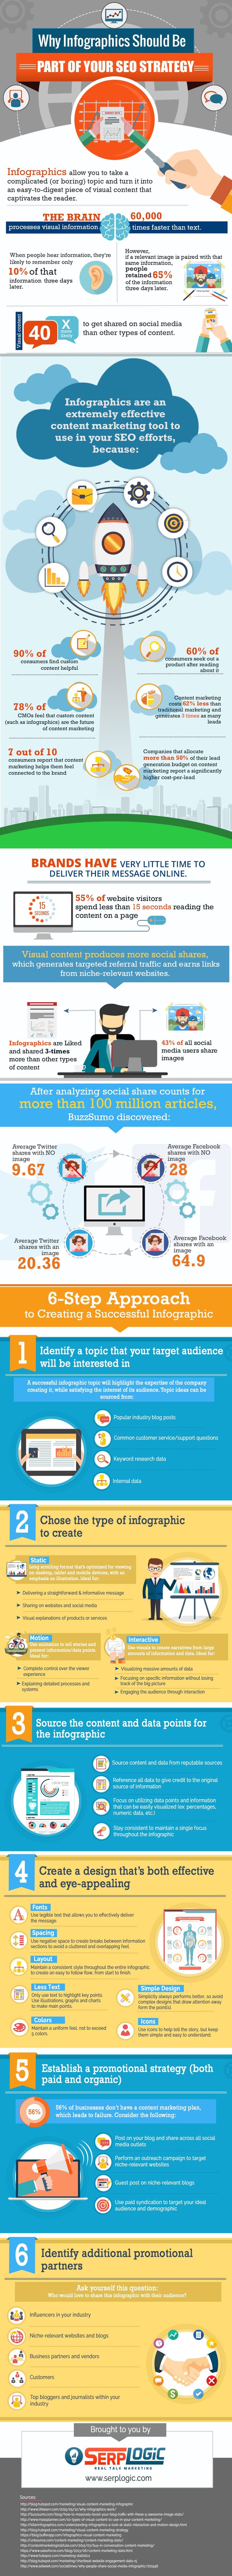 Why Infographics Should Be Part of Your SEO Strategy [Infographic]